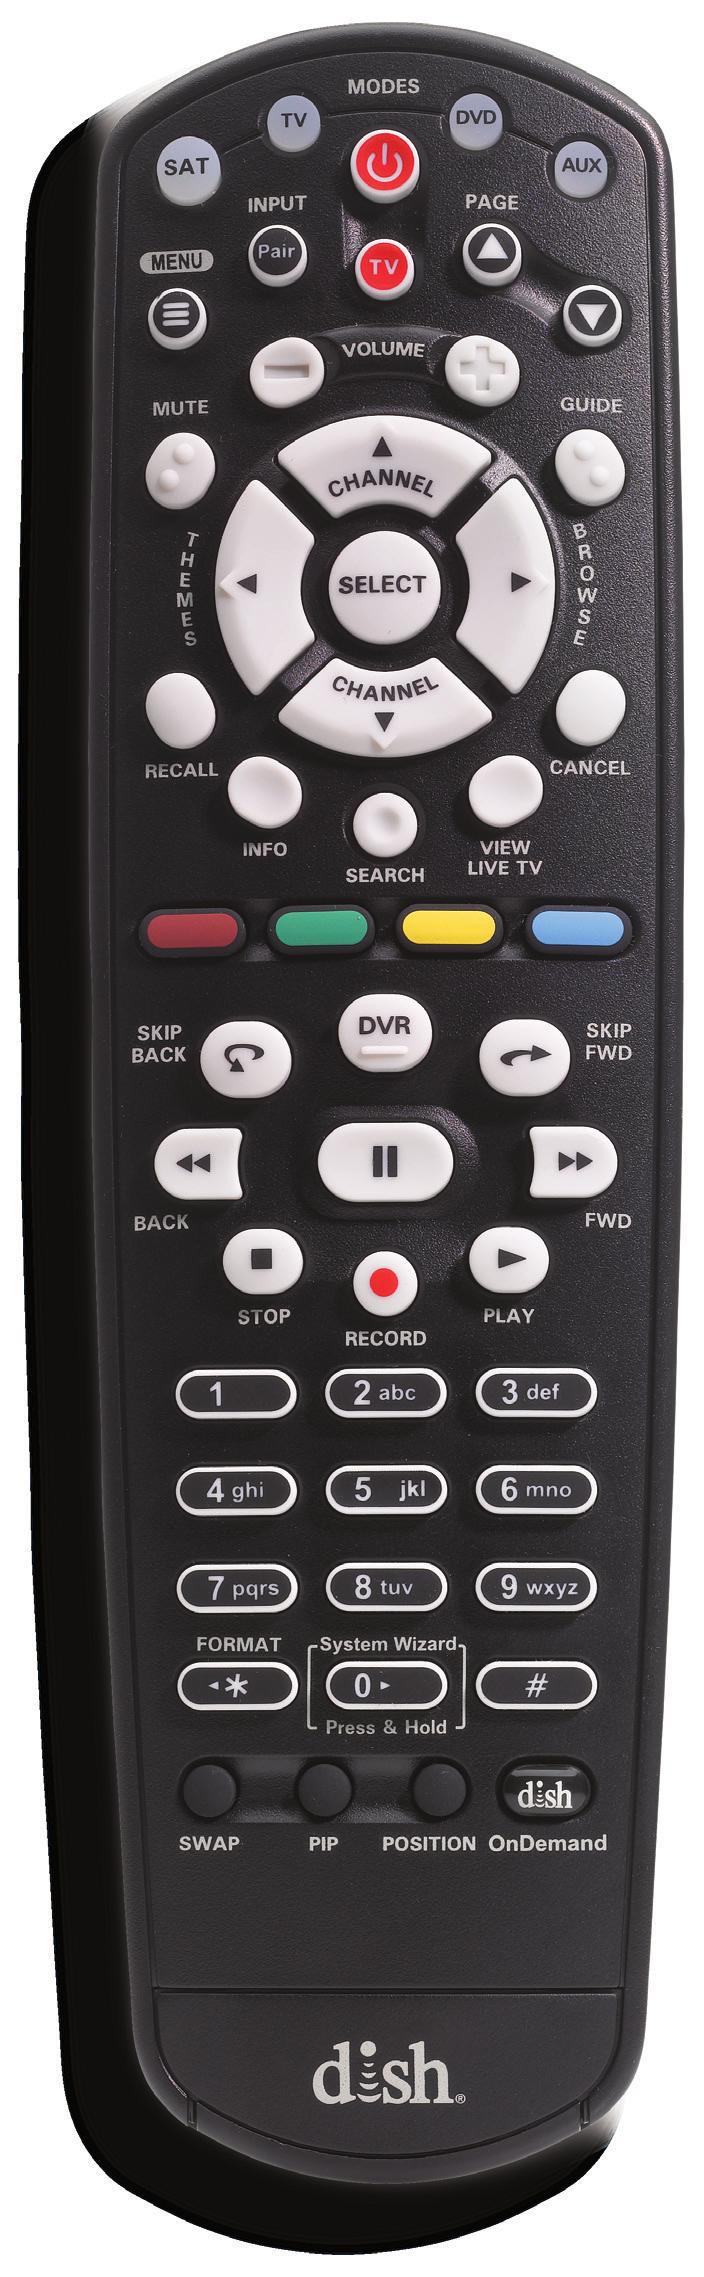 R E M OTE CONTROL M odel 40.0 Remote The new model 40.0 remote has the following features: 200 ft.